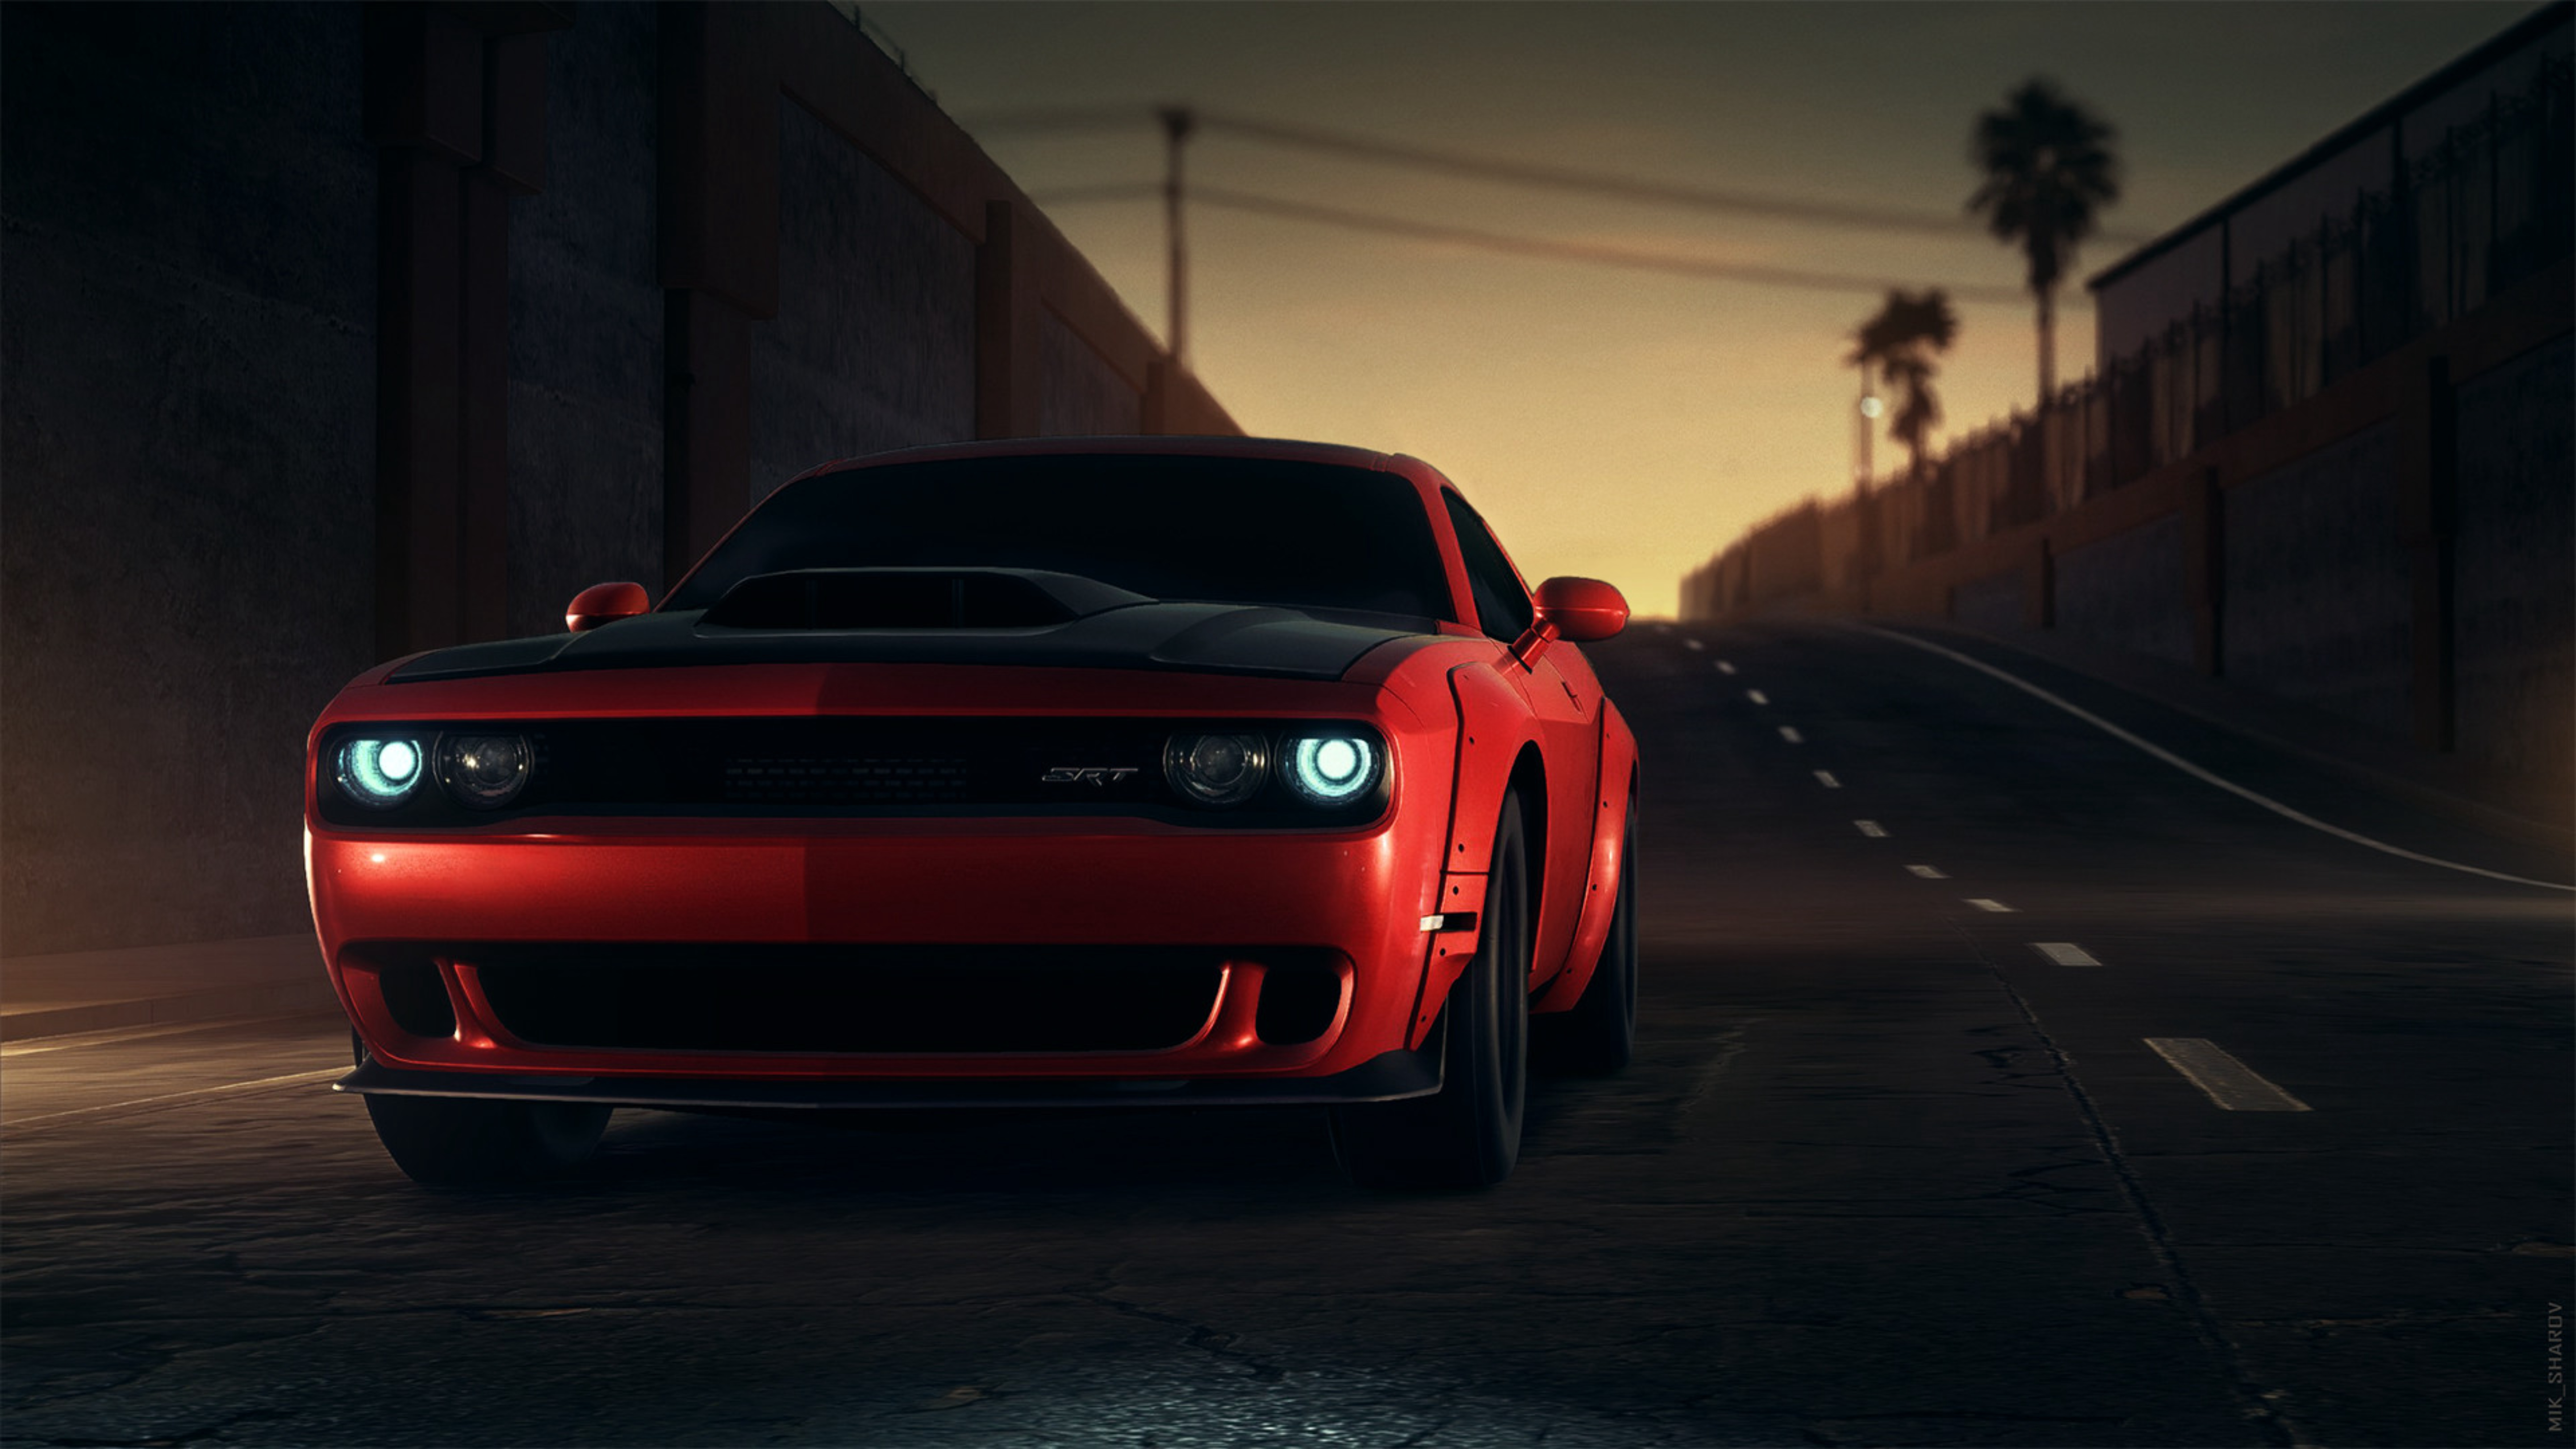 wallpapers cars, front view, sports car, dodge srt, dodge, headlights, lights, red, sports